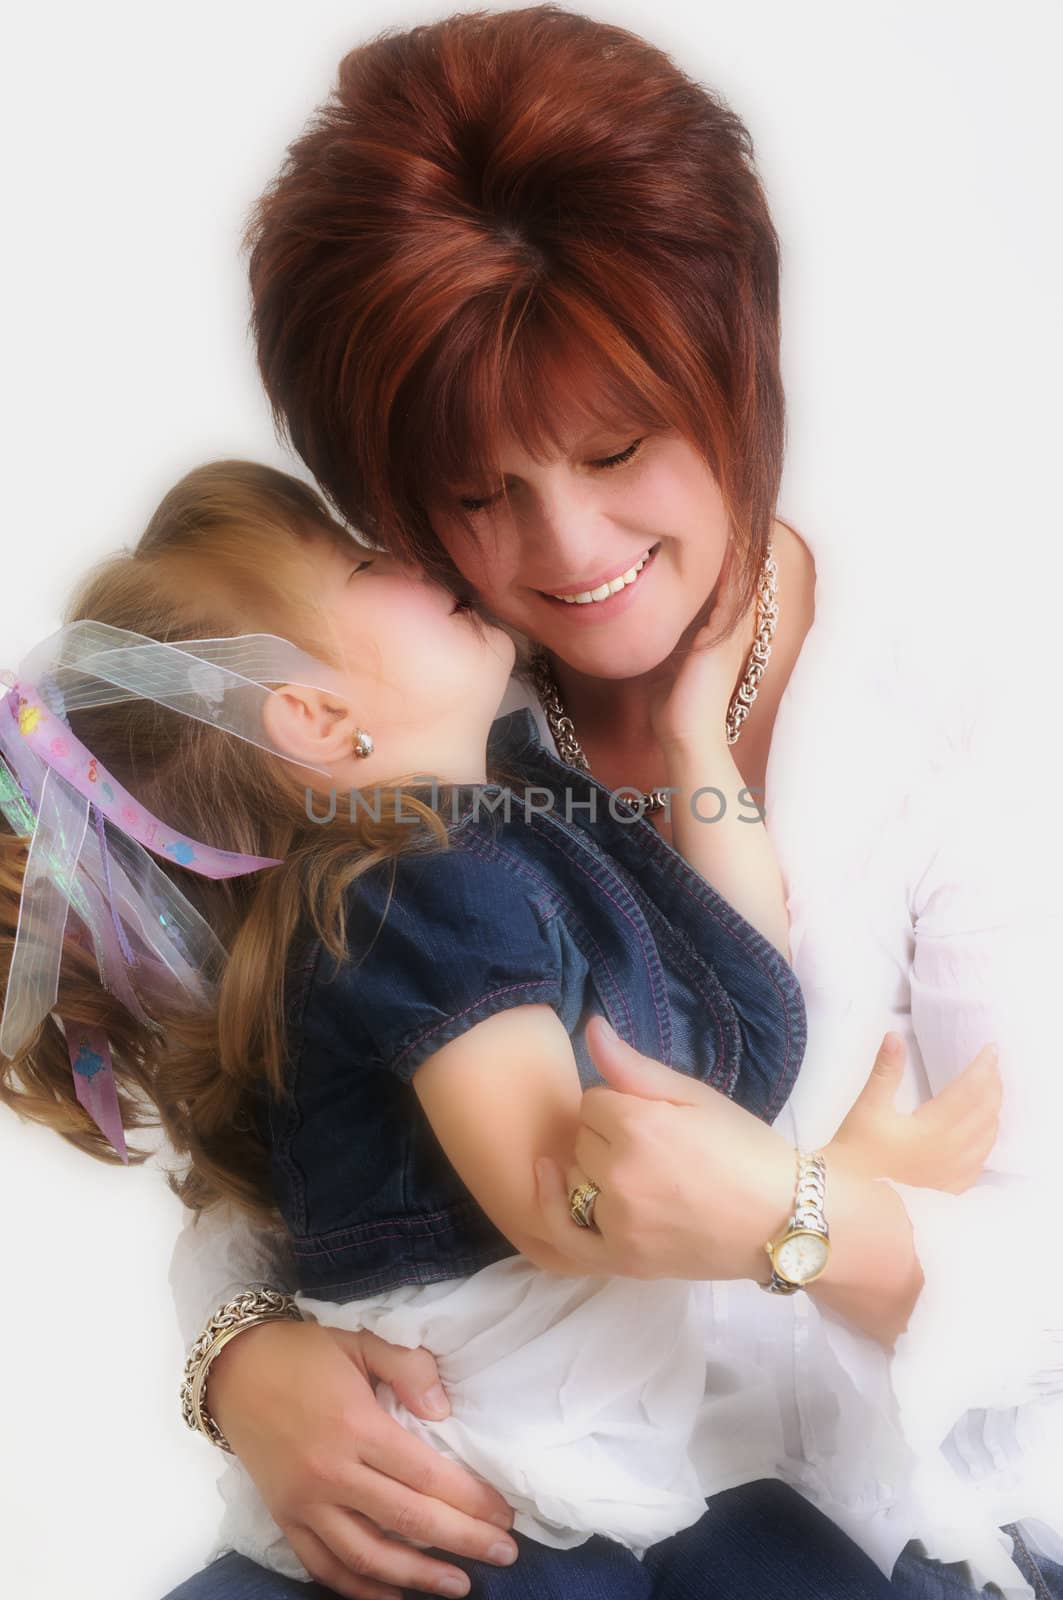 daughter kissing mother on the cheek and smiling